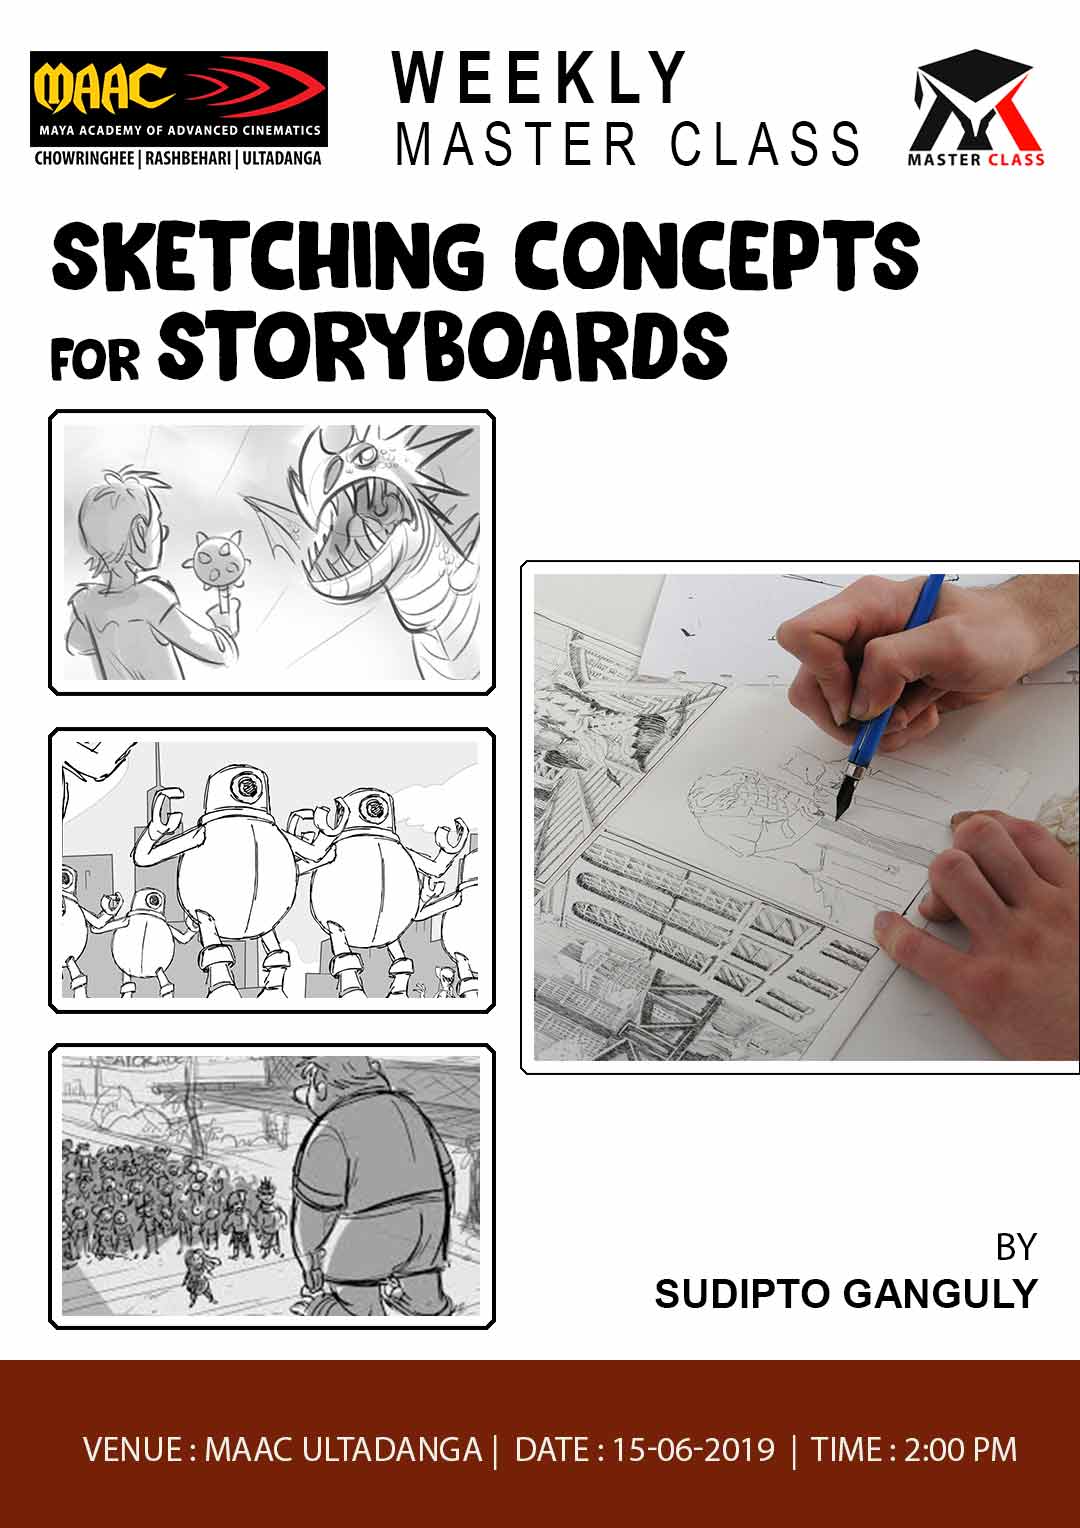 Weekly Master Class on Sketching Concepts for Story Boards